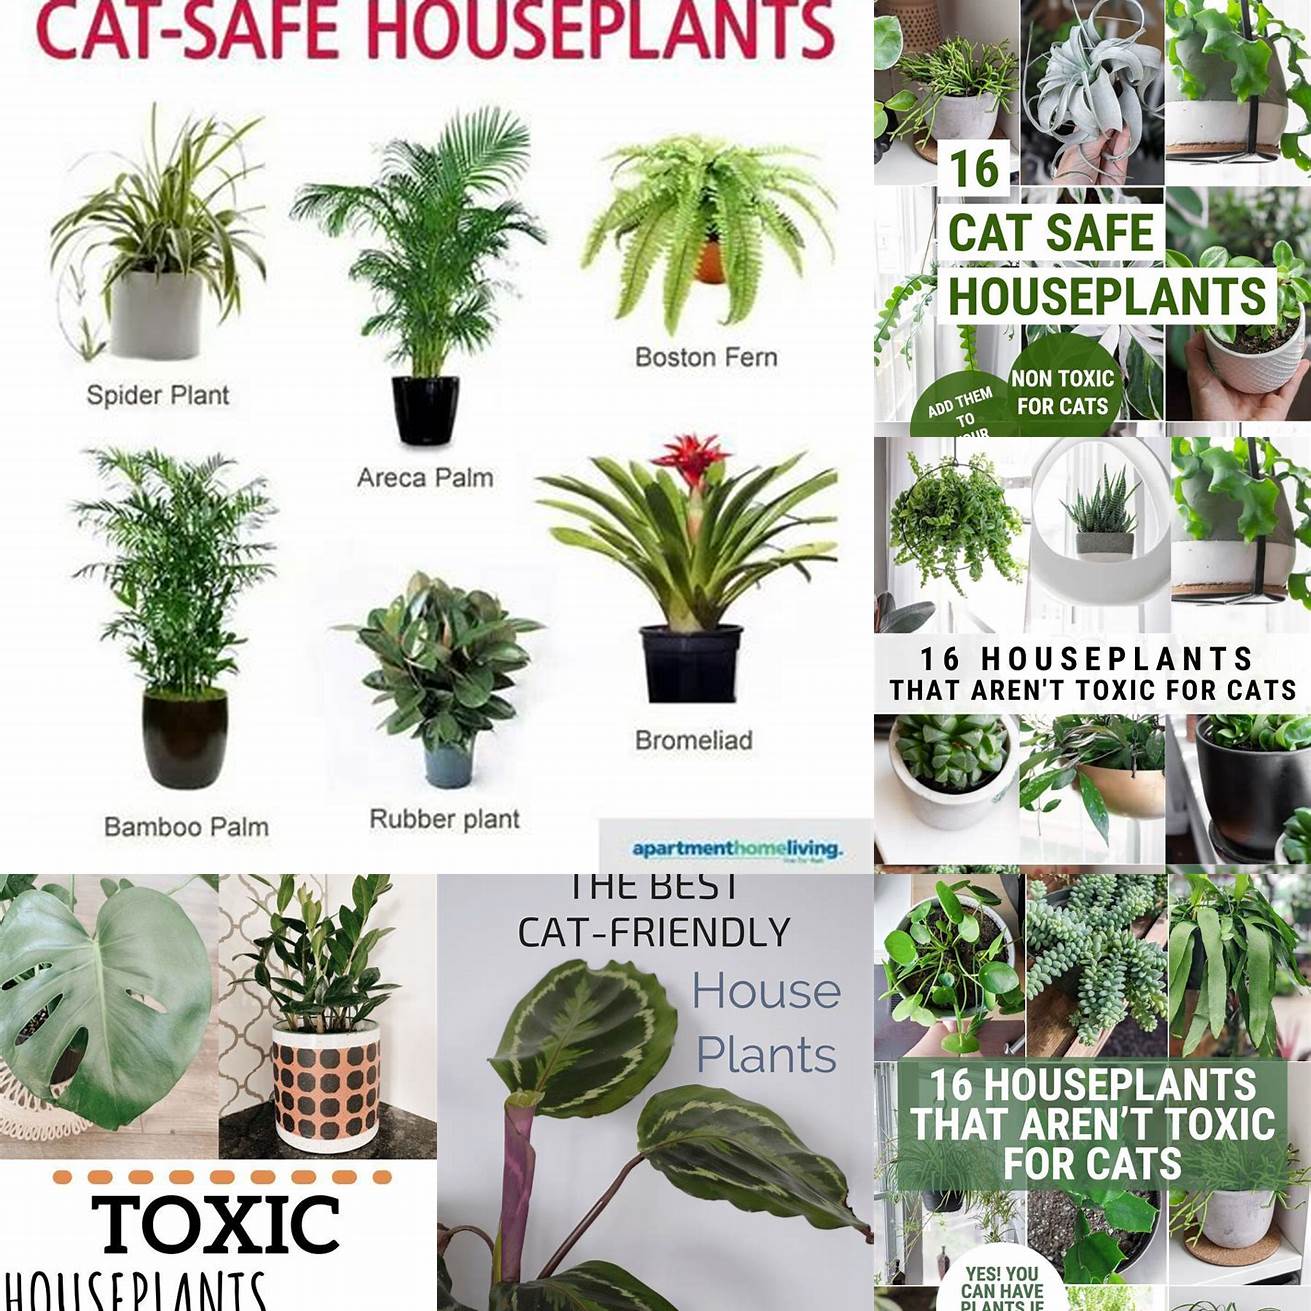 Q How can you keep your cat safe from toxic plants A You can keep your cat safe from toxic plants by doing research before bringing any new plants into your home and keeping toxic plants out of reach